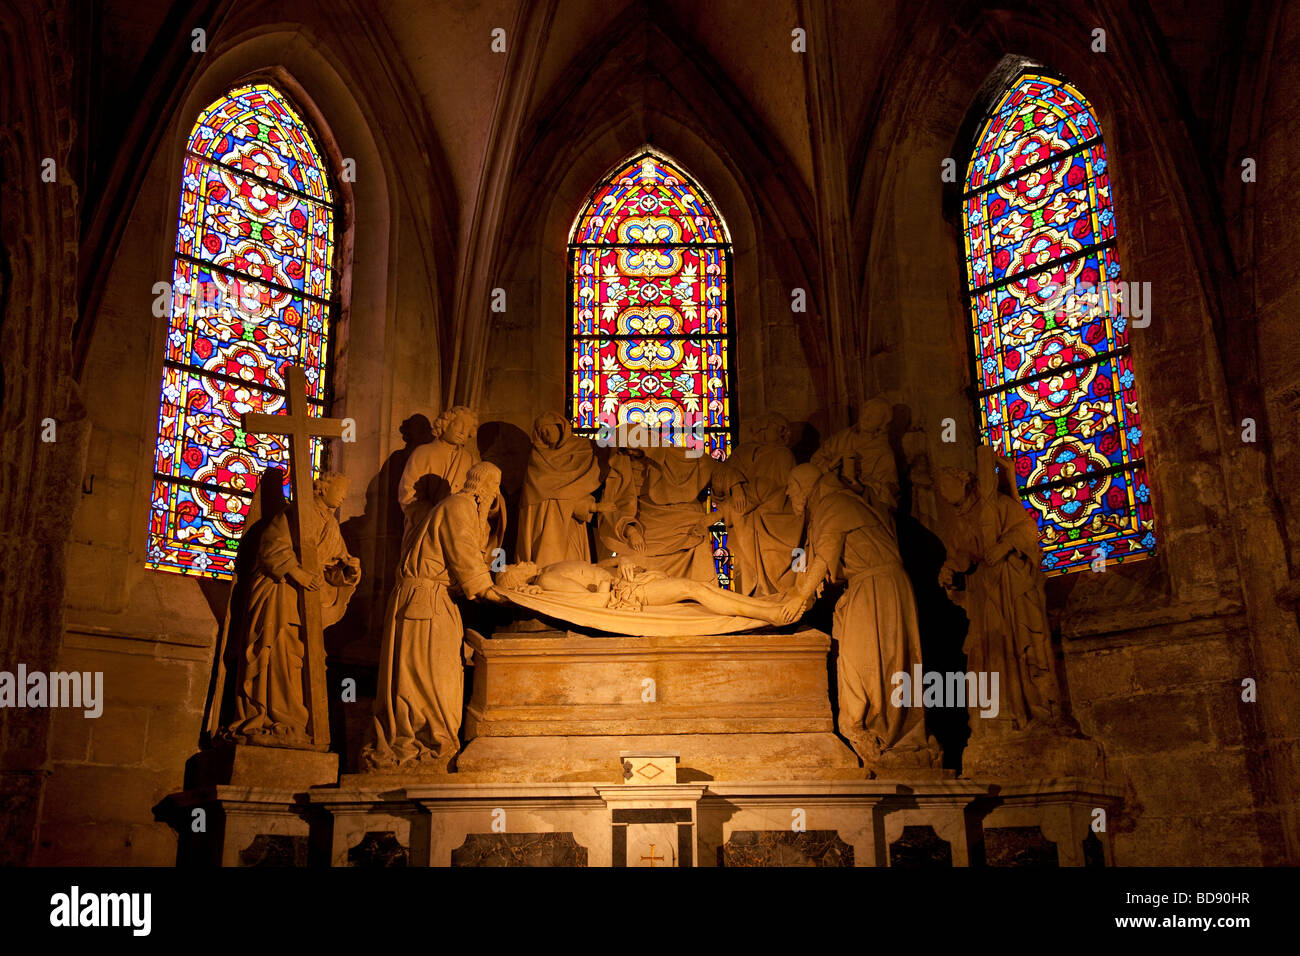 Sculpture inside Saint Trophime church in Arles, Provence France Stock  Photo - Alamy